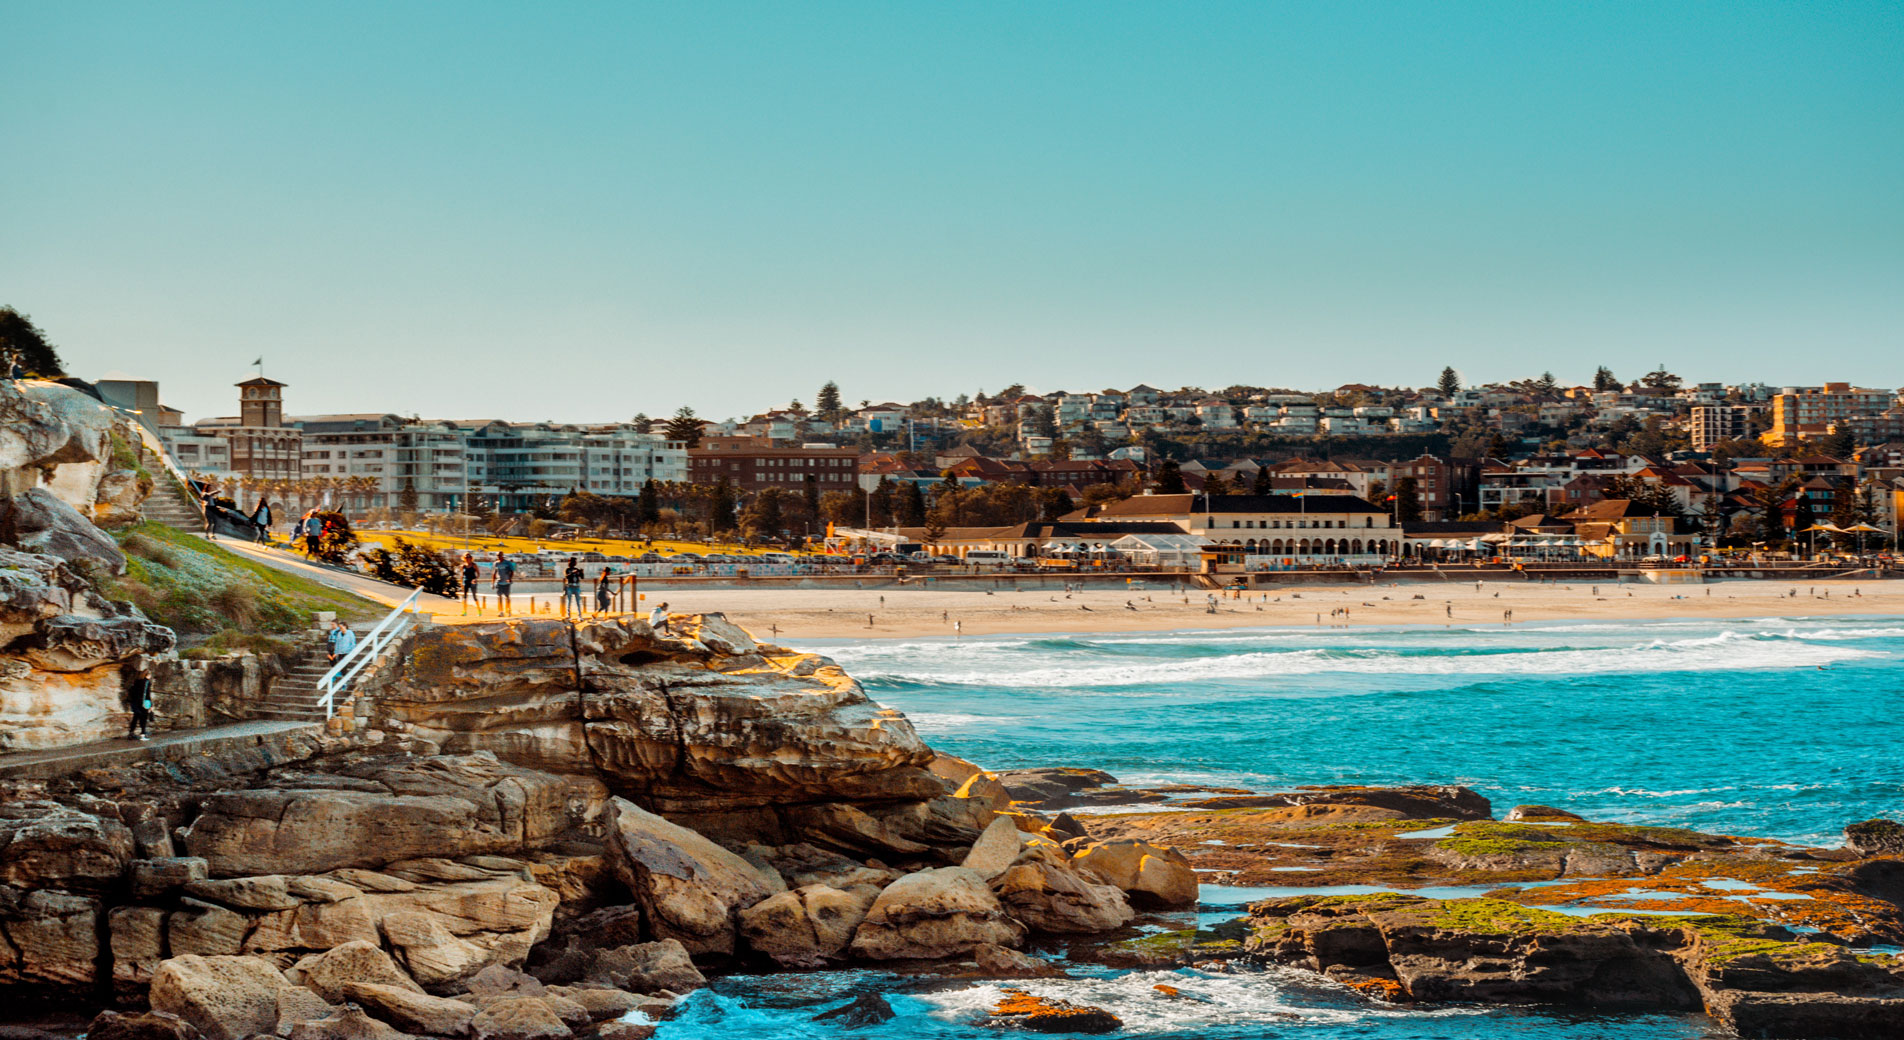 shout from rocky outcrop of bondi walk, looking back at bondi beach. the sun is setting off screen, throwing light on rocks, walkers and building, blue ocean waves crash on sandy shore.